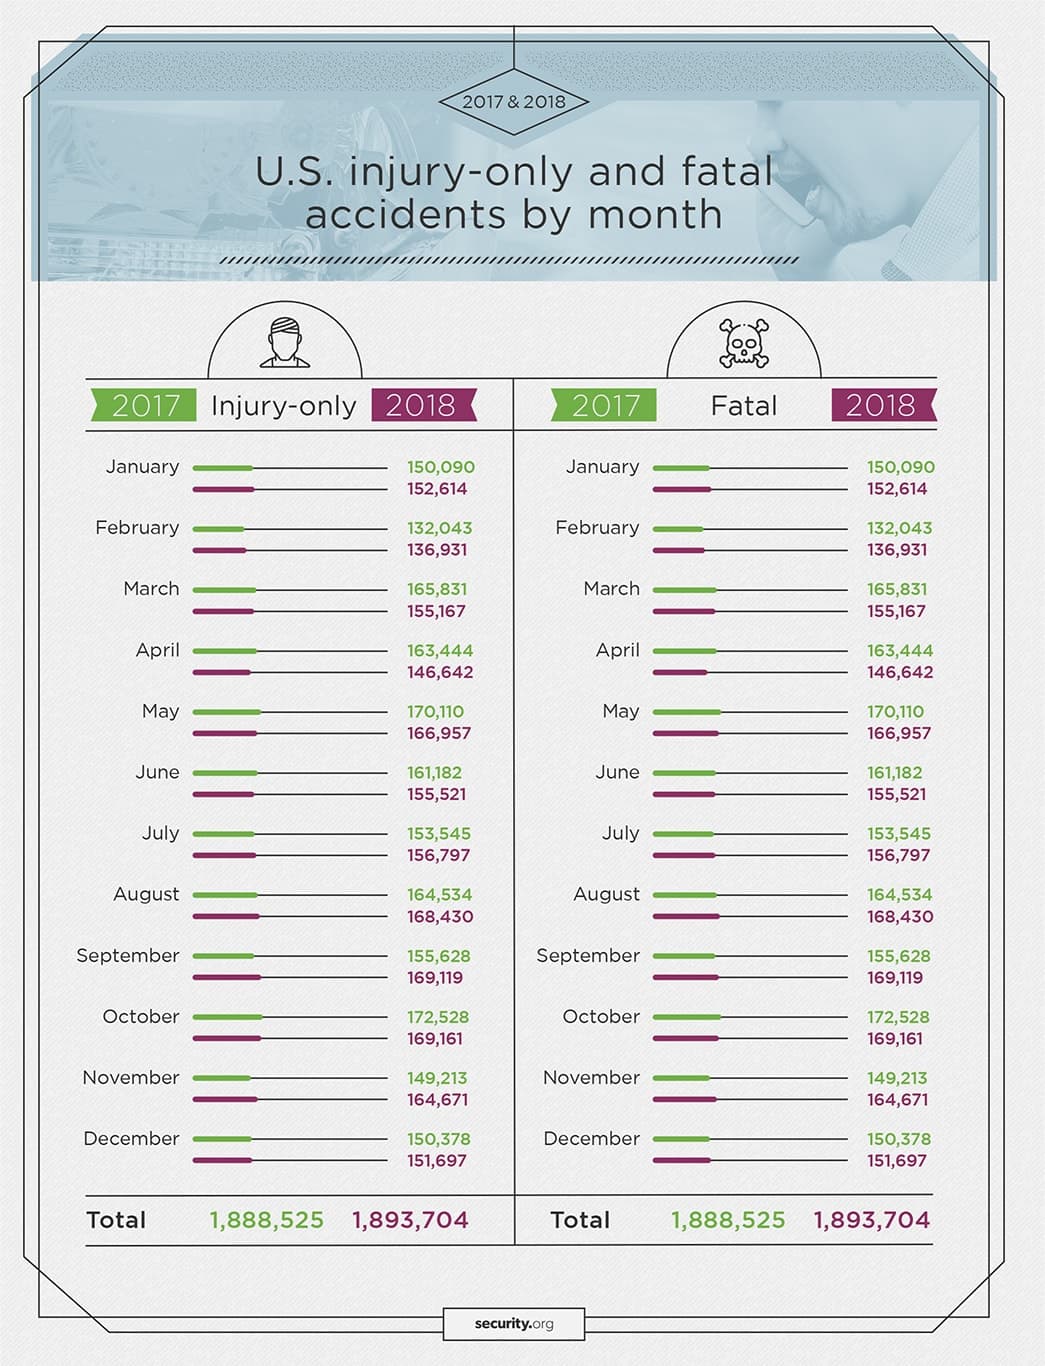 U.S. injury-only and fatal accidents by month in 2017 and 2018